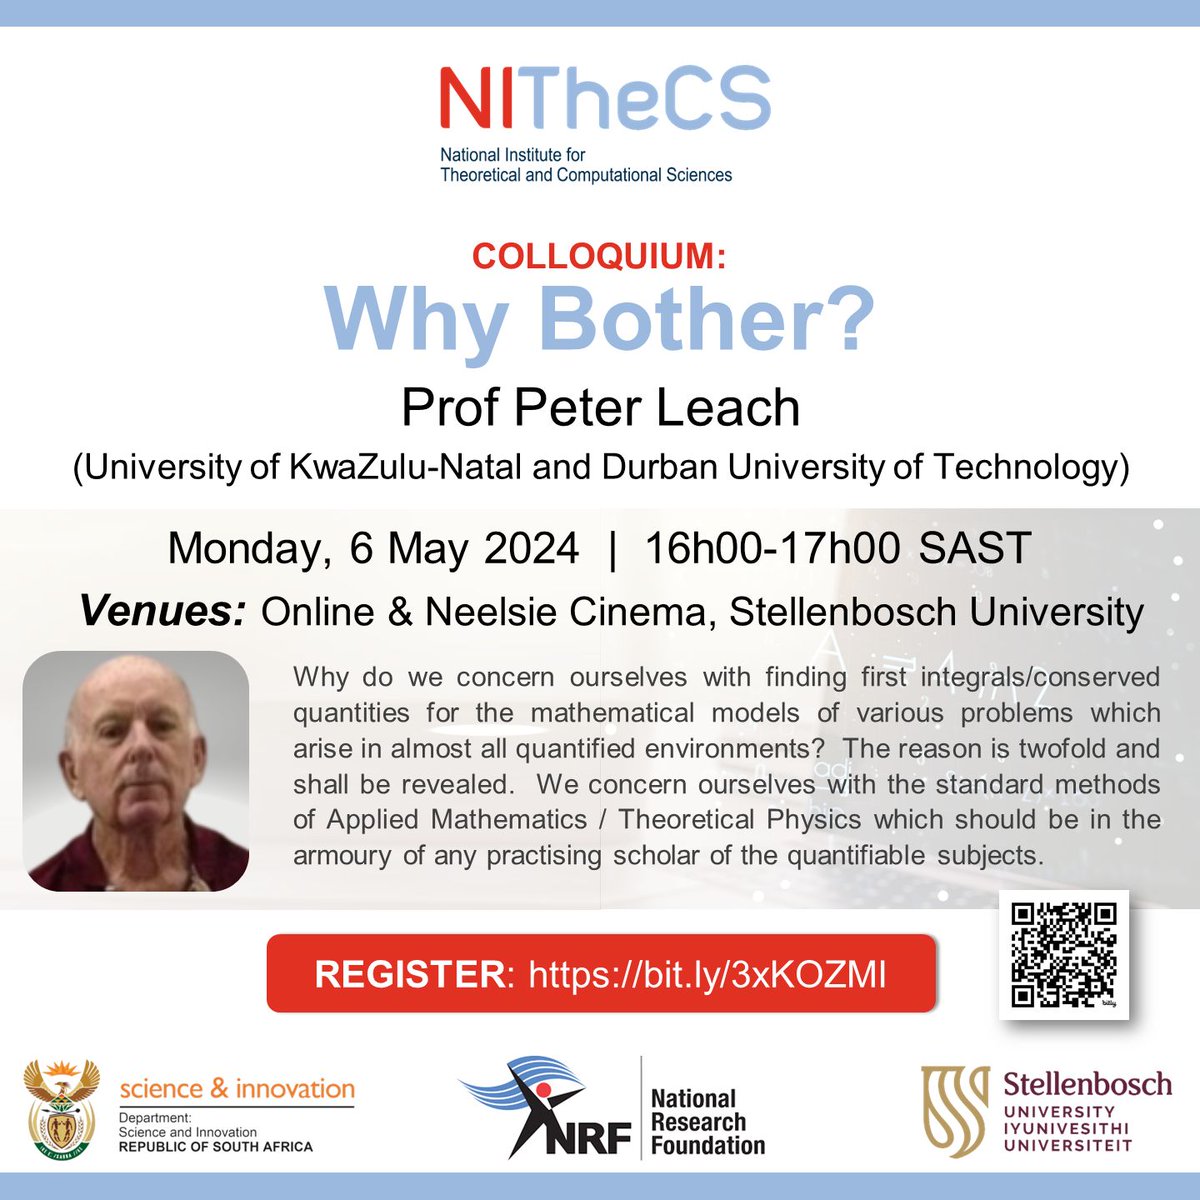 Reminder - NITheCS Colloquium: 'Why Bother?' Prof Peter Leach (UKZN & DUT) - today @ 16h00 SAST. Attend online or in person. Cheese and wine will be served at the venue. buff.ly/3WvNwnS #mathematics #appliedmathematics #theoreticalphysics